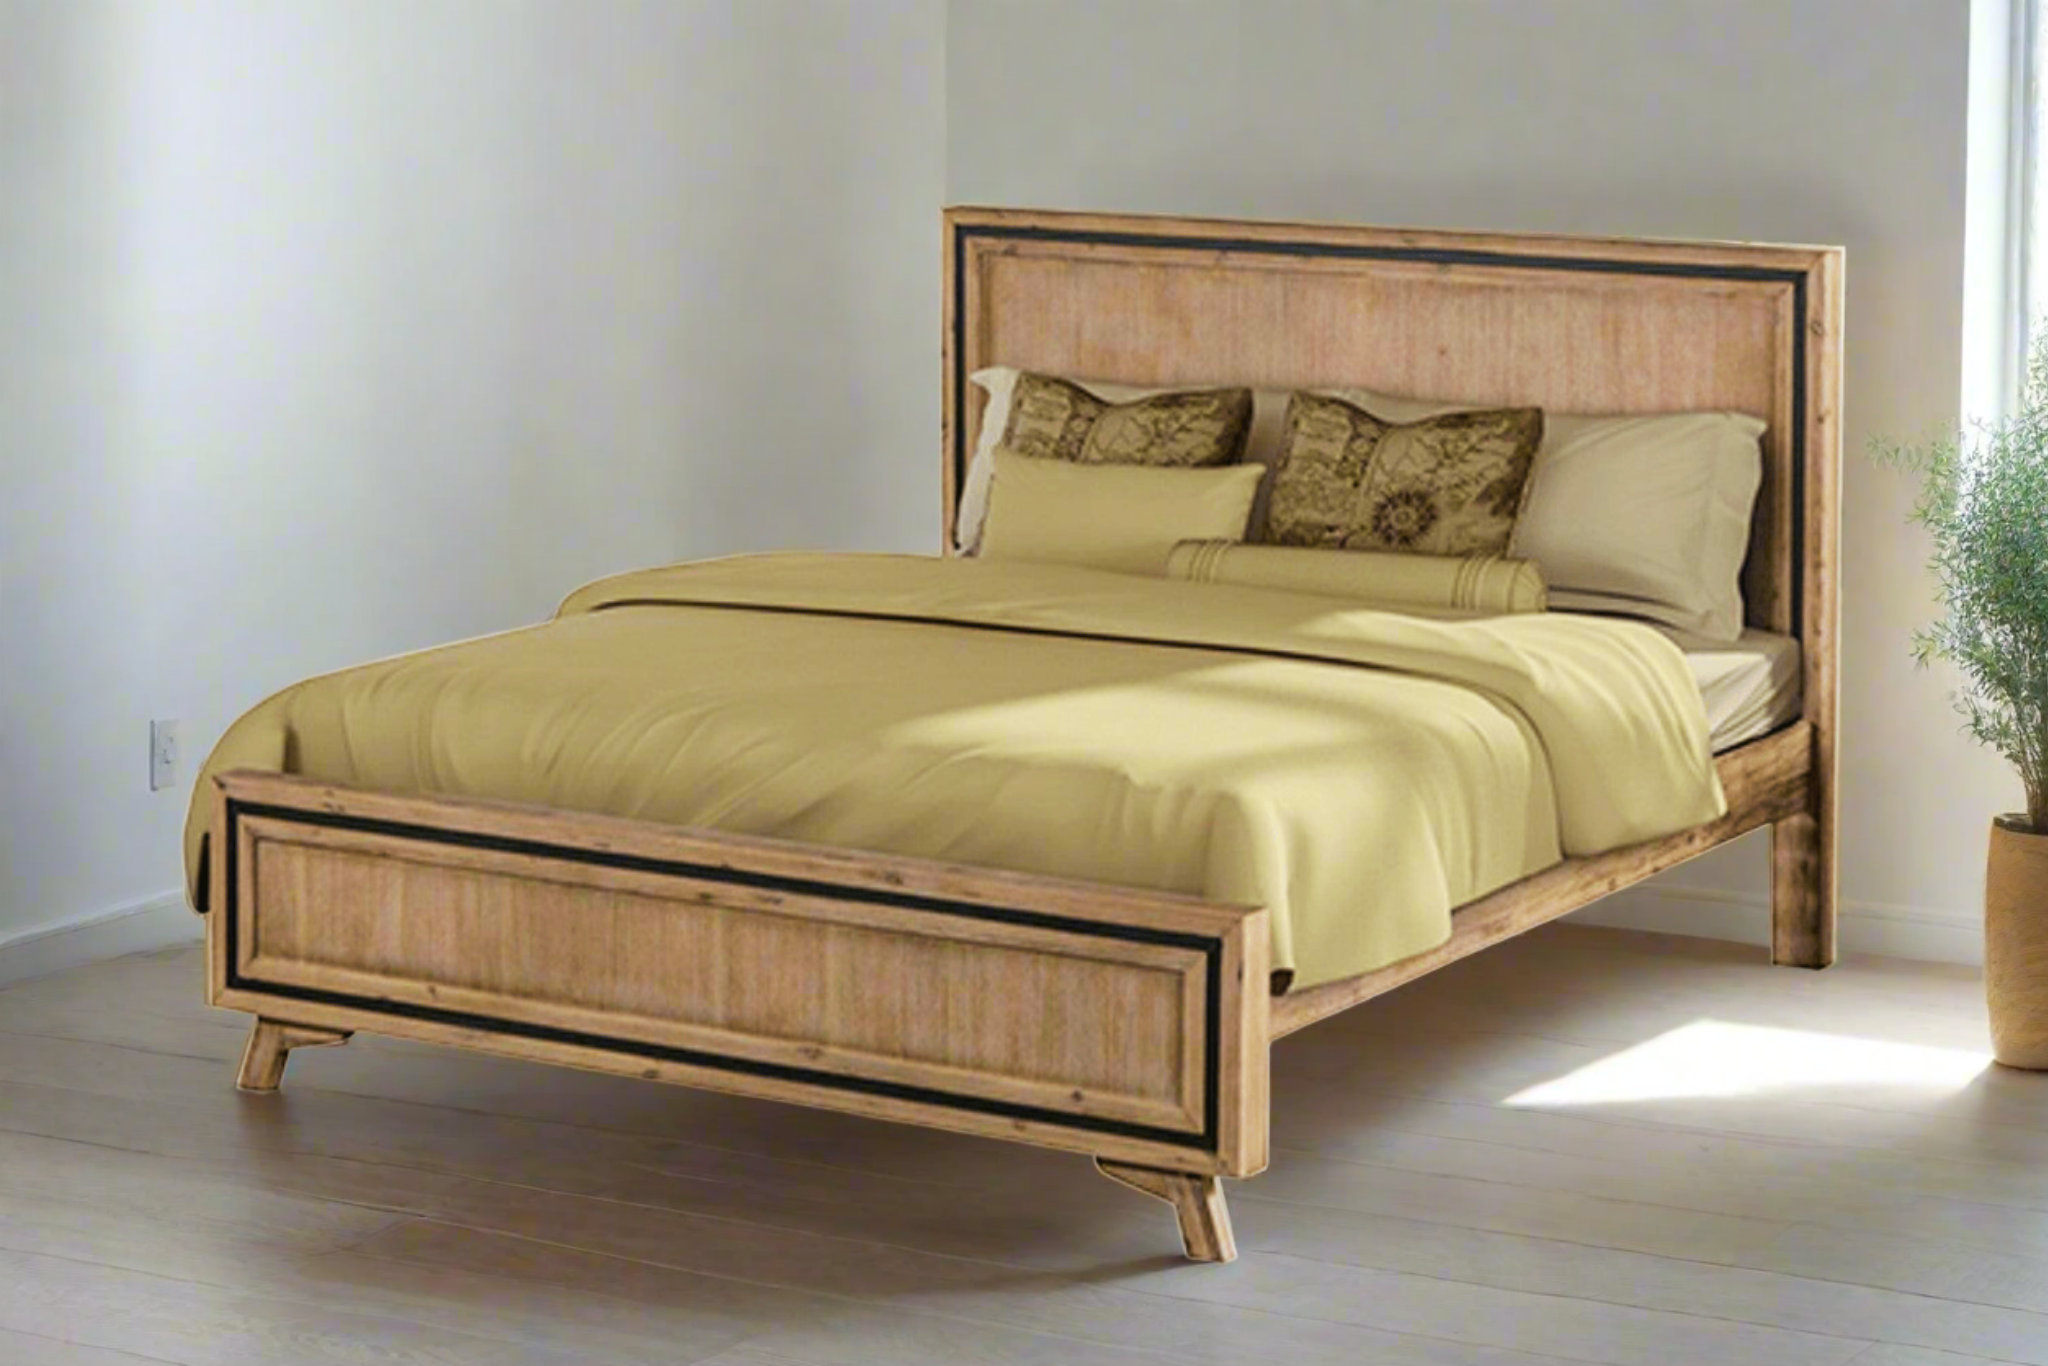 Jack Bed Frame - Solid Acacia Wood - Modern Design - Available in Queen and King Size - The A2Z Furniture